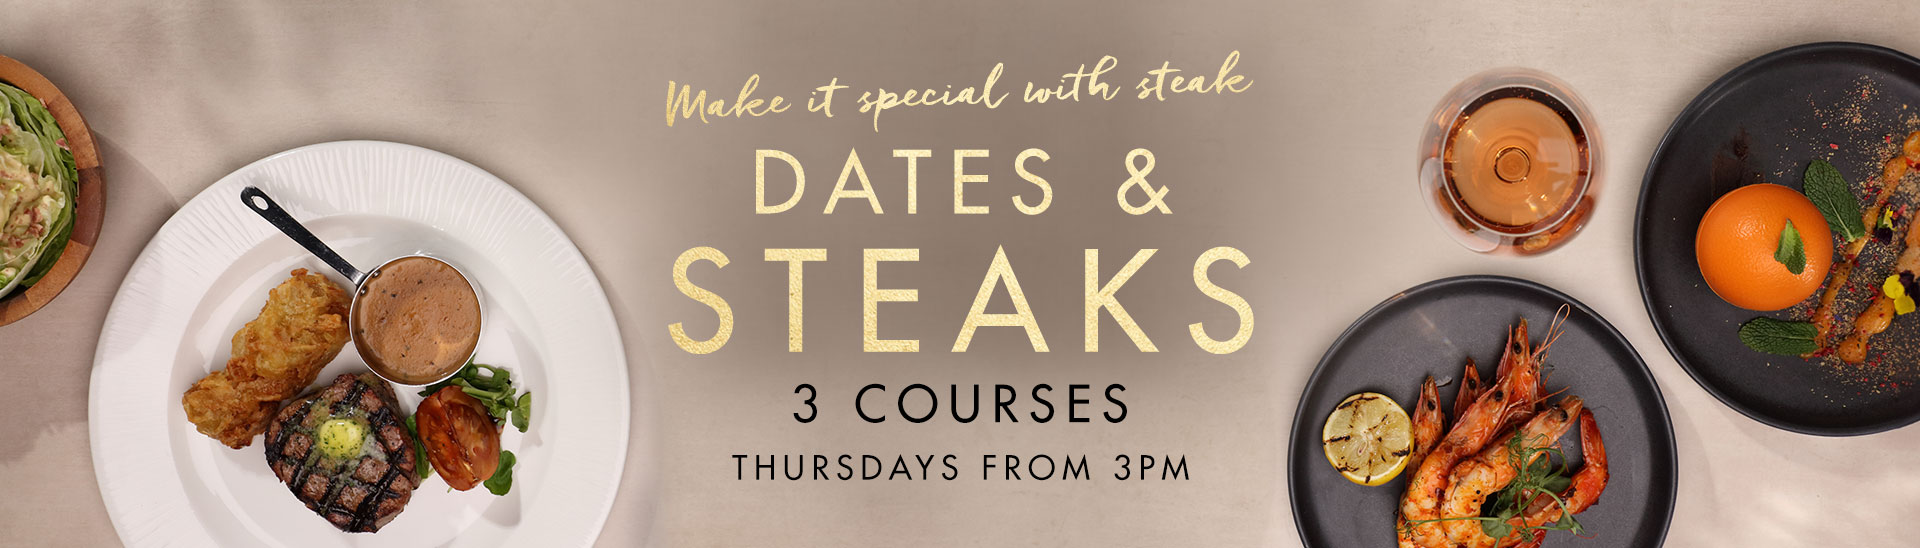 Dates & Steaks at Miller & Carter Coventry